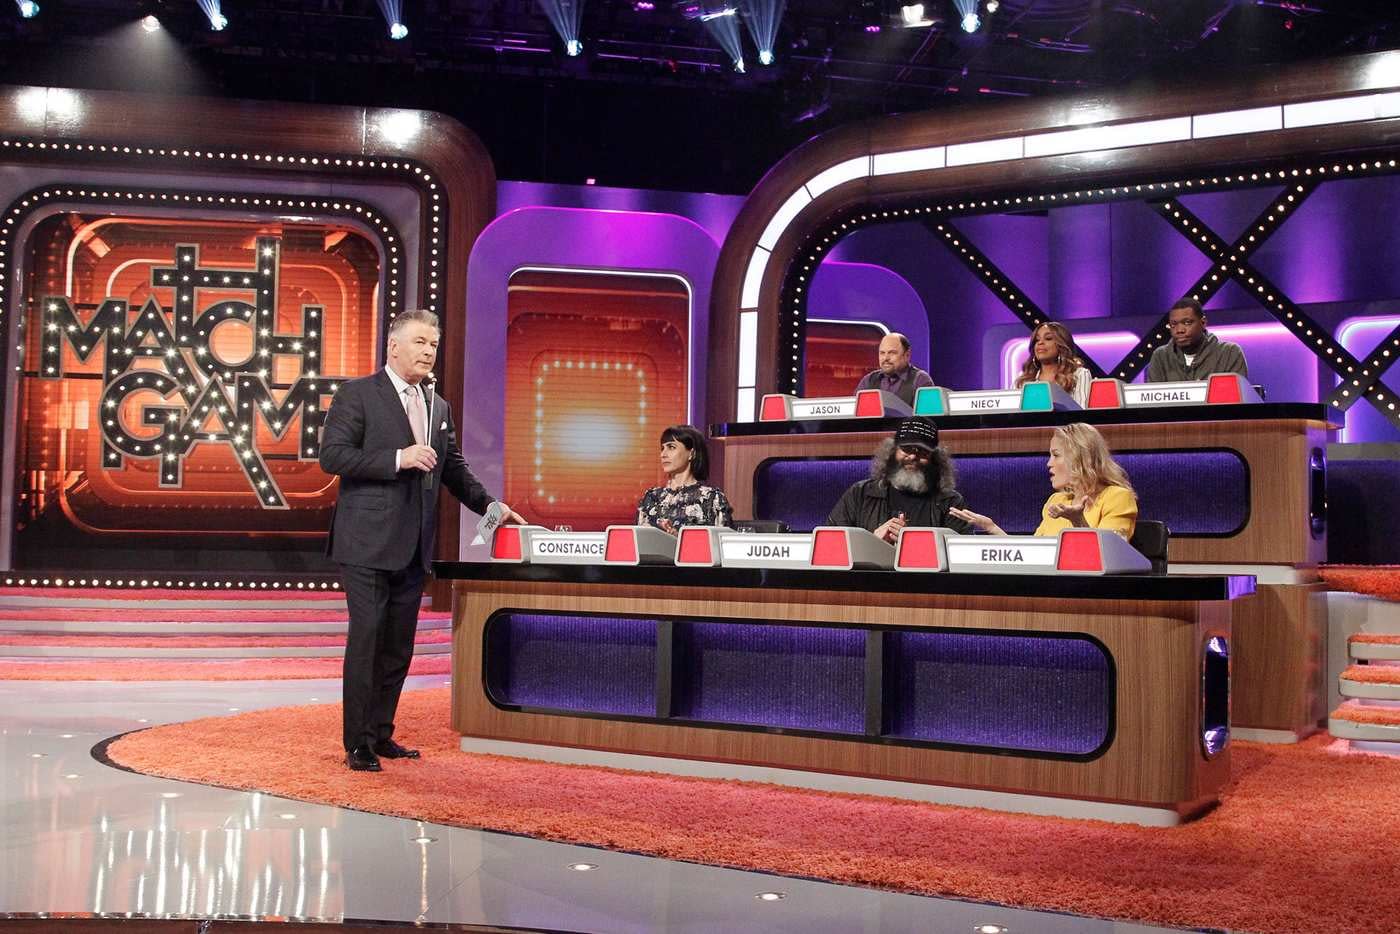 Press Your Luck, Card Sharks, Match Game: How I Learned To Stop Worrying And Love Game Shows Again